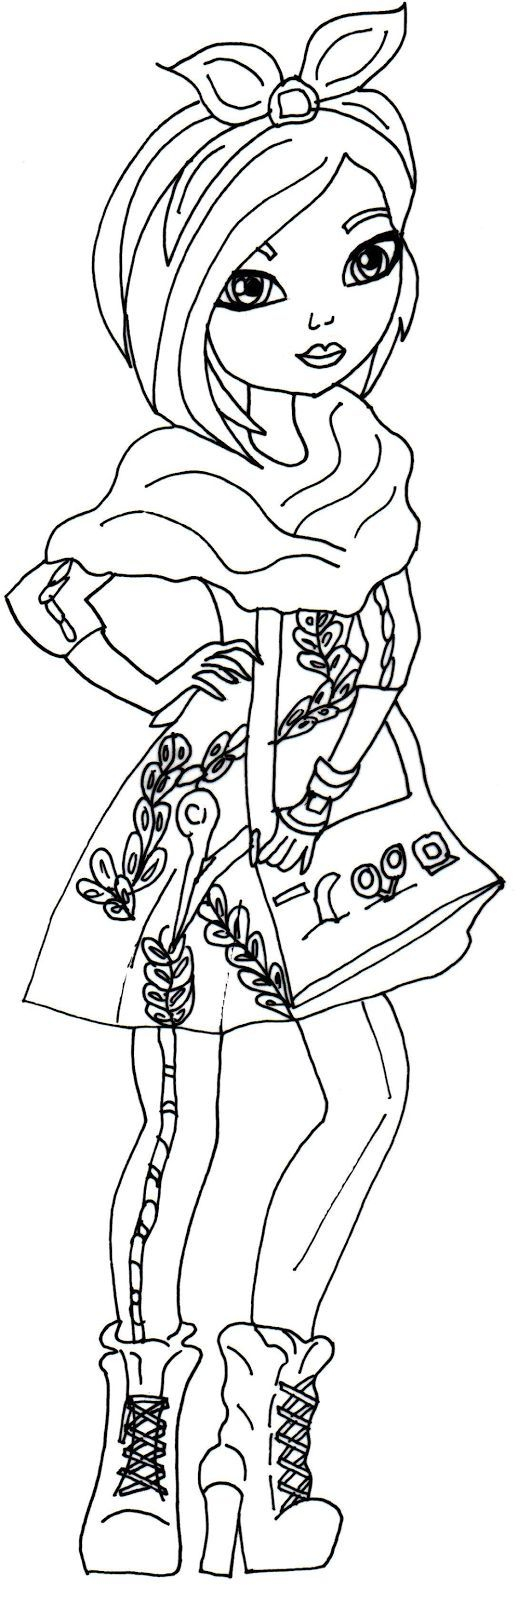 Madeline Coloring Pages Printable Free Madeline Coloring Pages Coloring Home